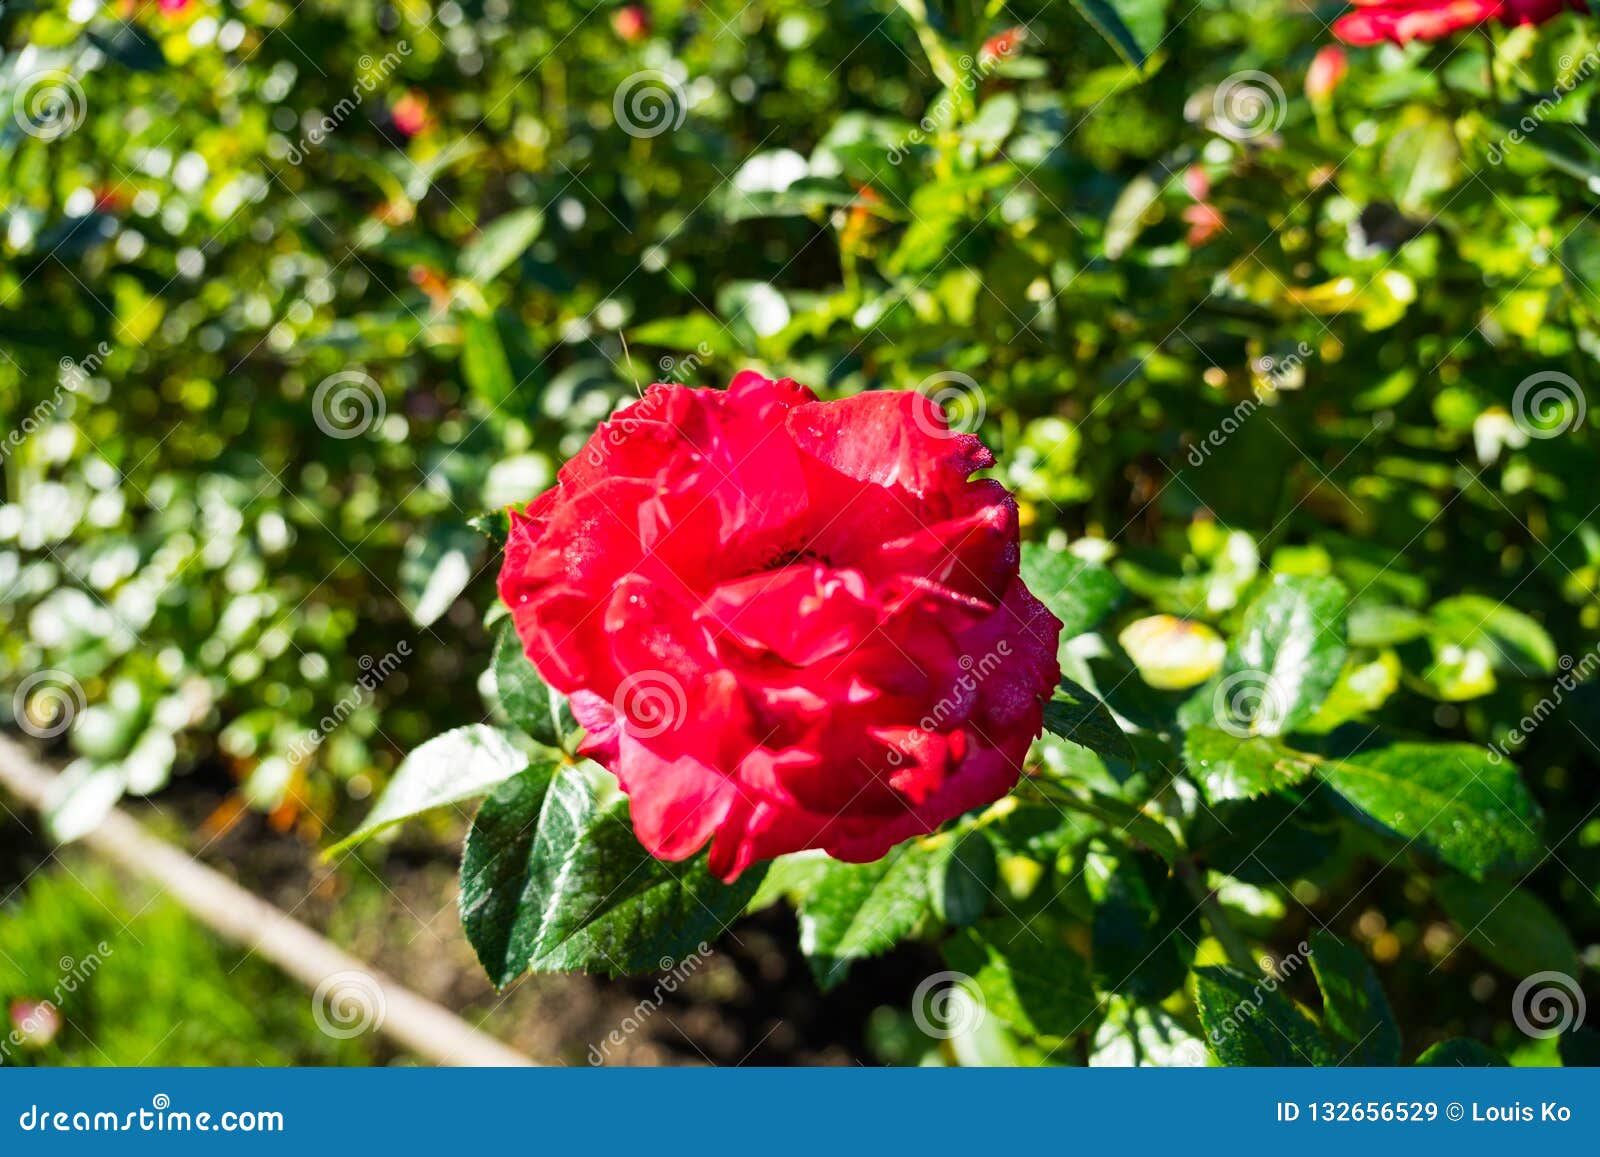 Red Roses Blurry Background In Rose Gardens Stock Image Image Of